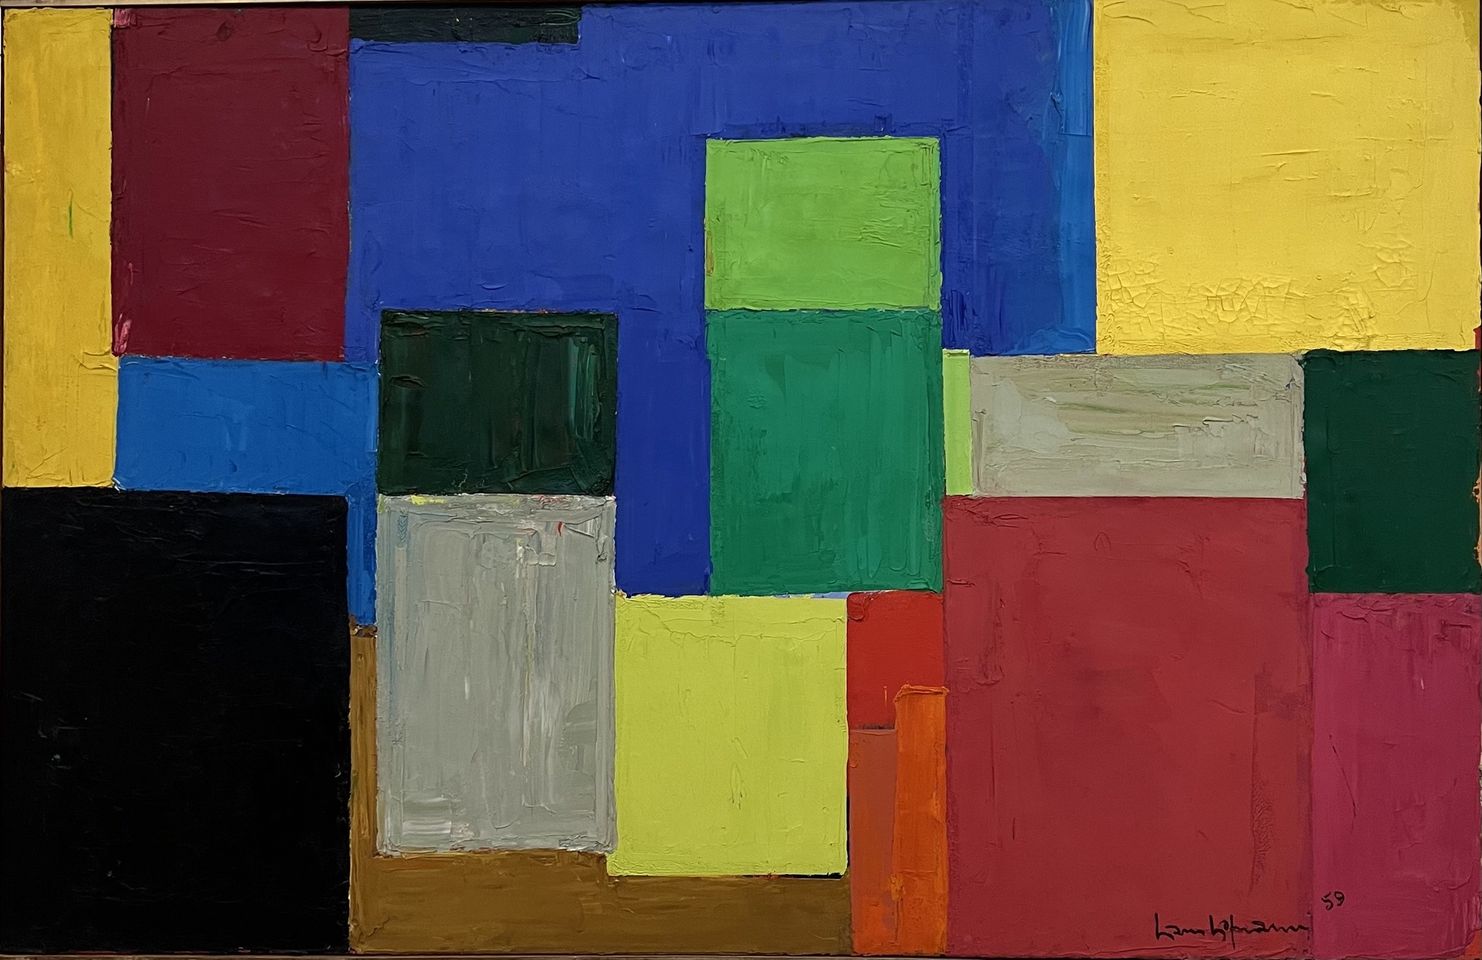 Hans Hofmann (1880-1966), Fall Euphony (1959). Anderson Collection at Stanford University